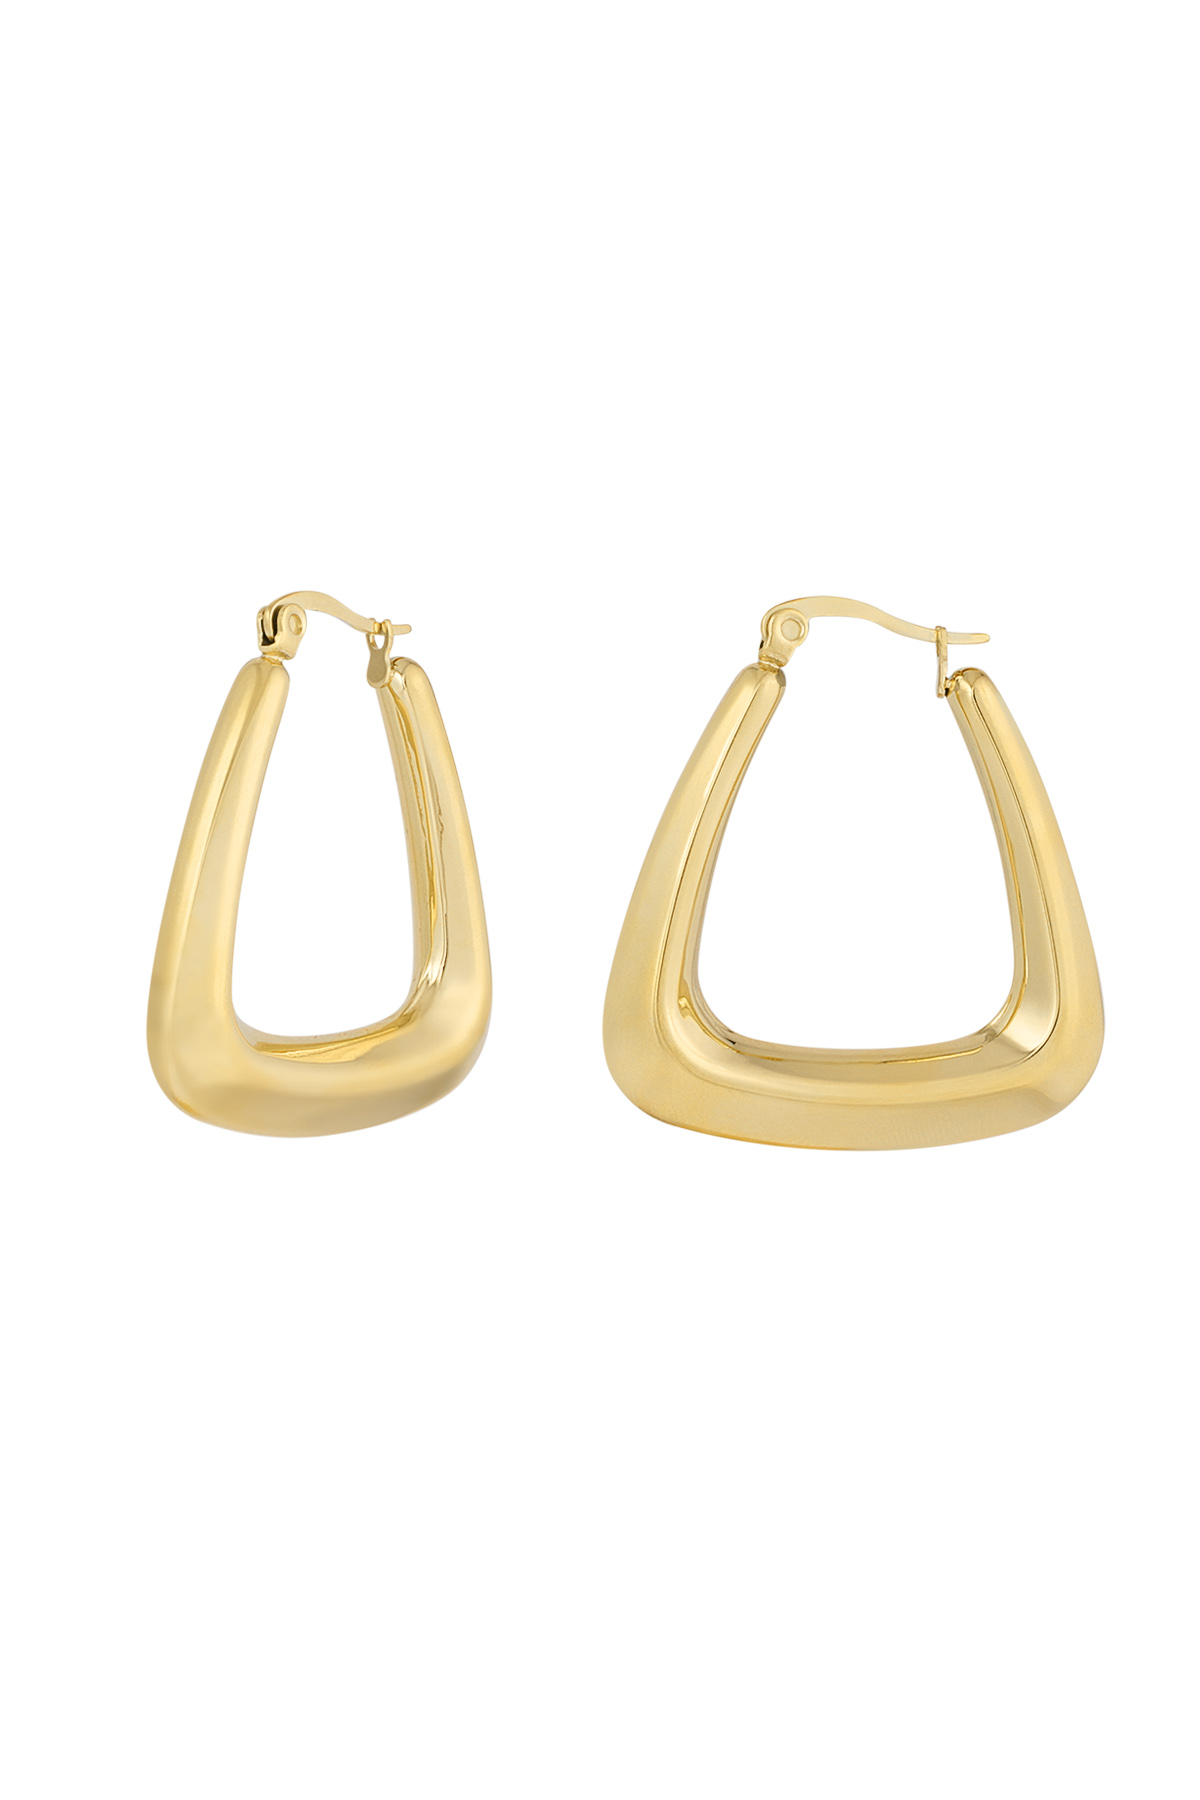 Simple statement earrings - gold